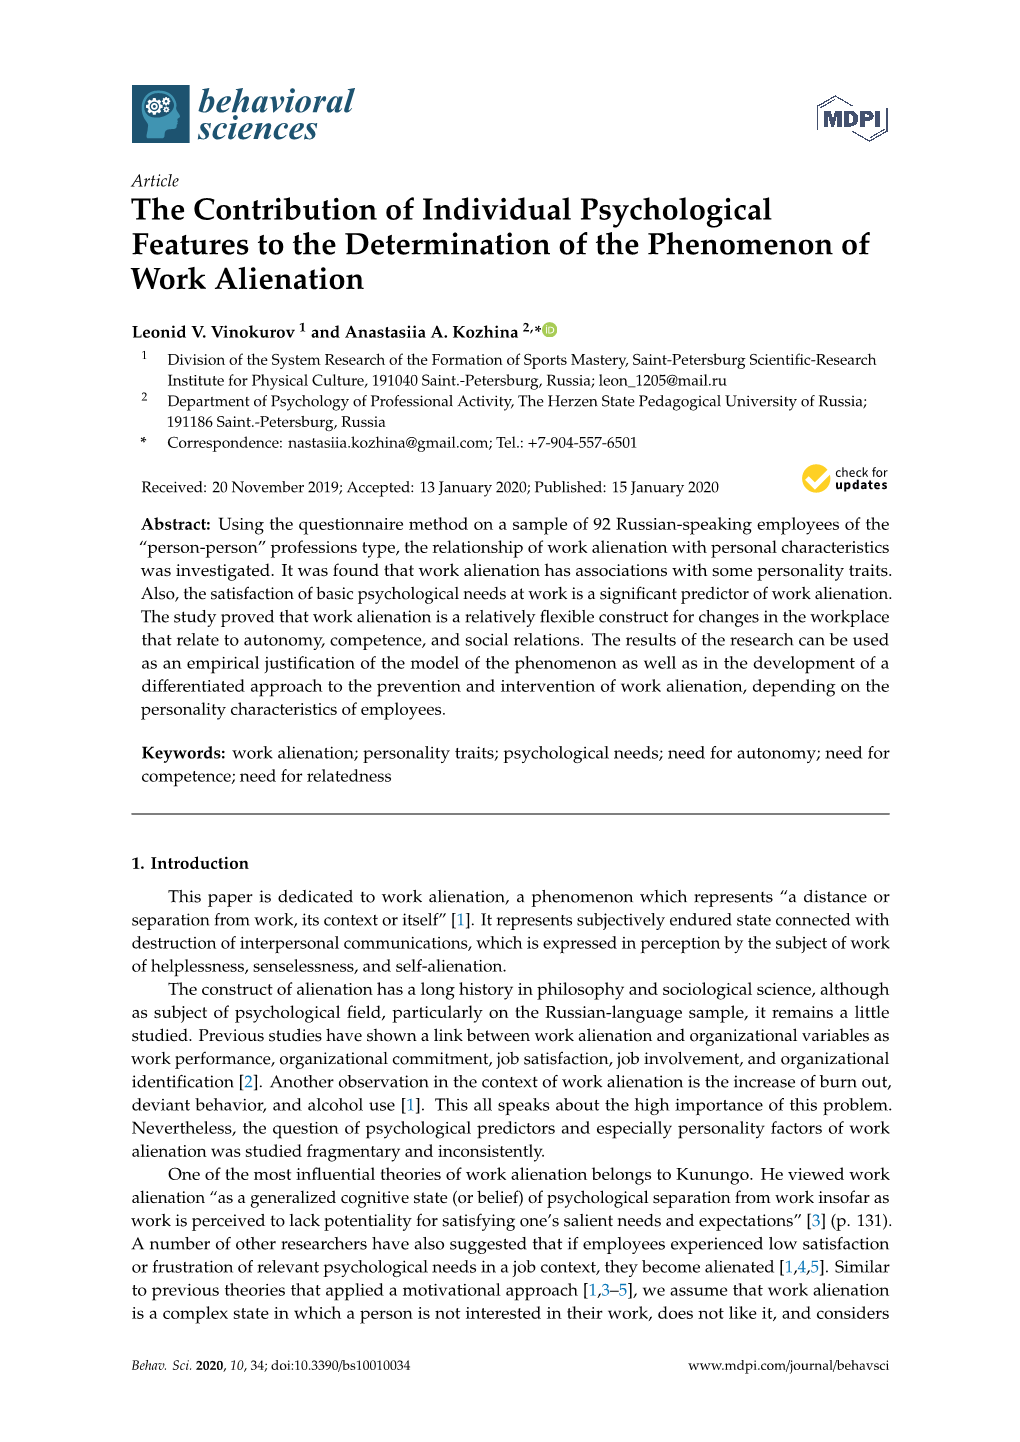 The Contribution of Individual Psychological Features to the Determination of the Phenomenon of Work Alienation